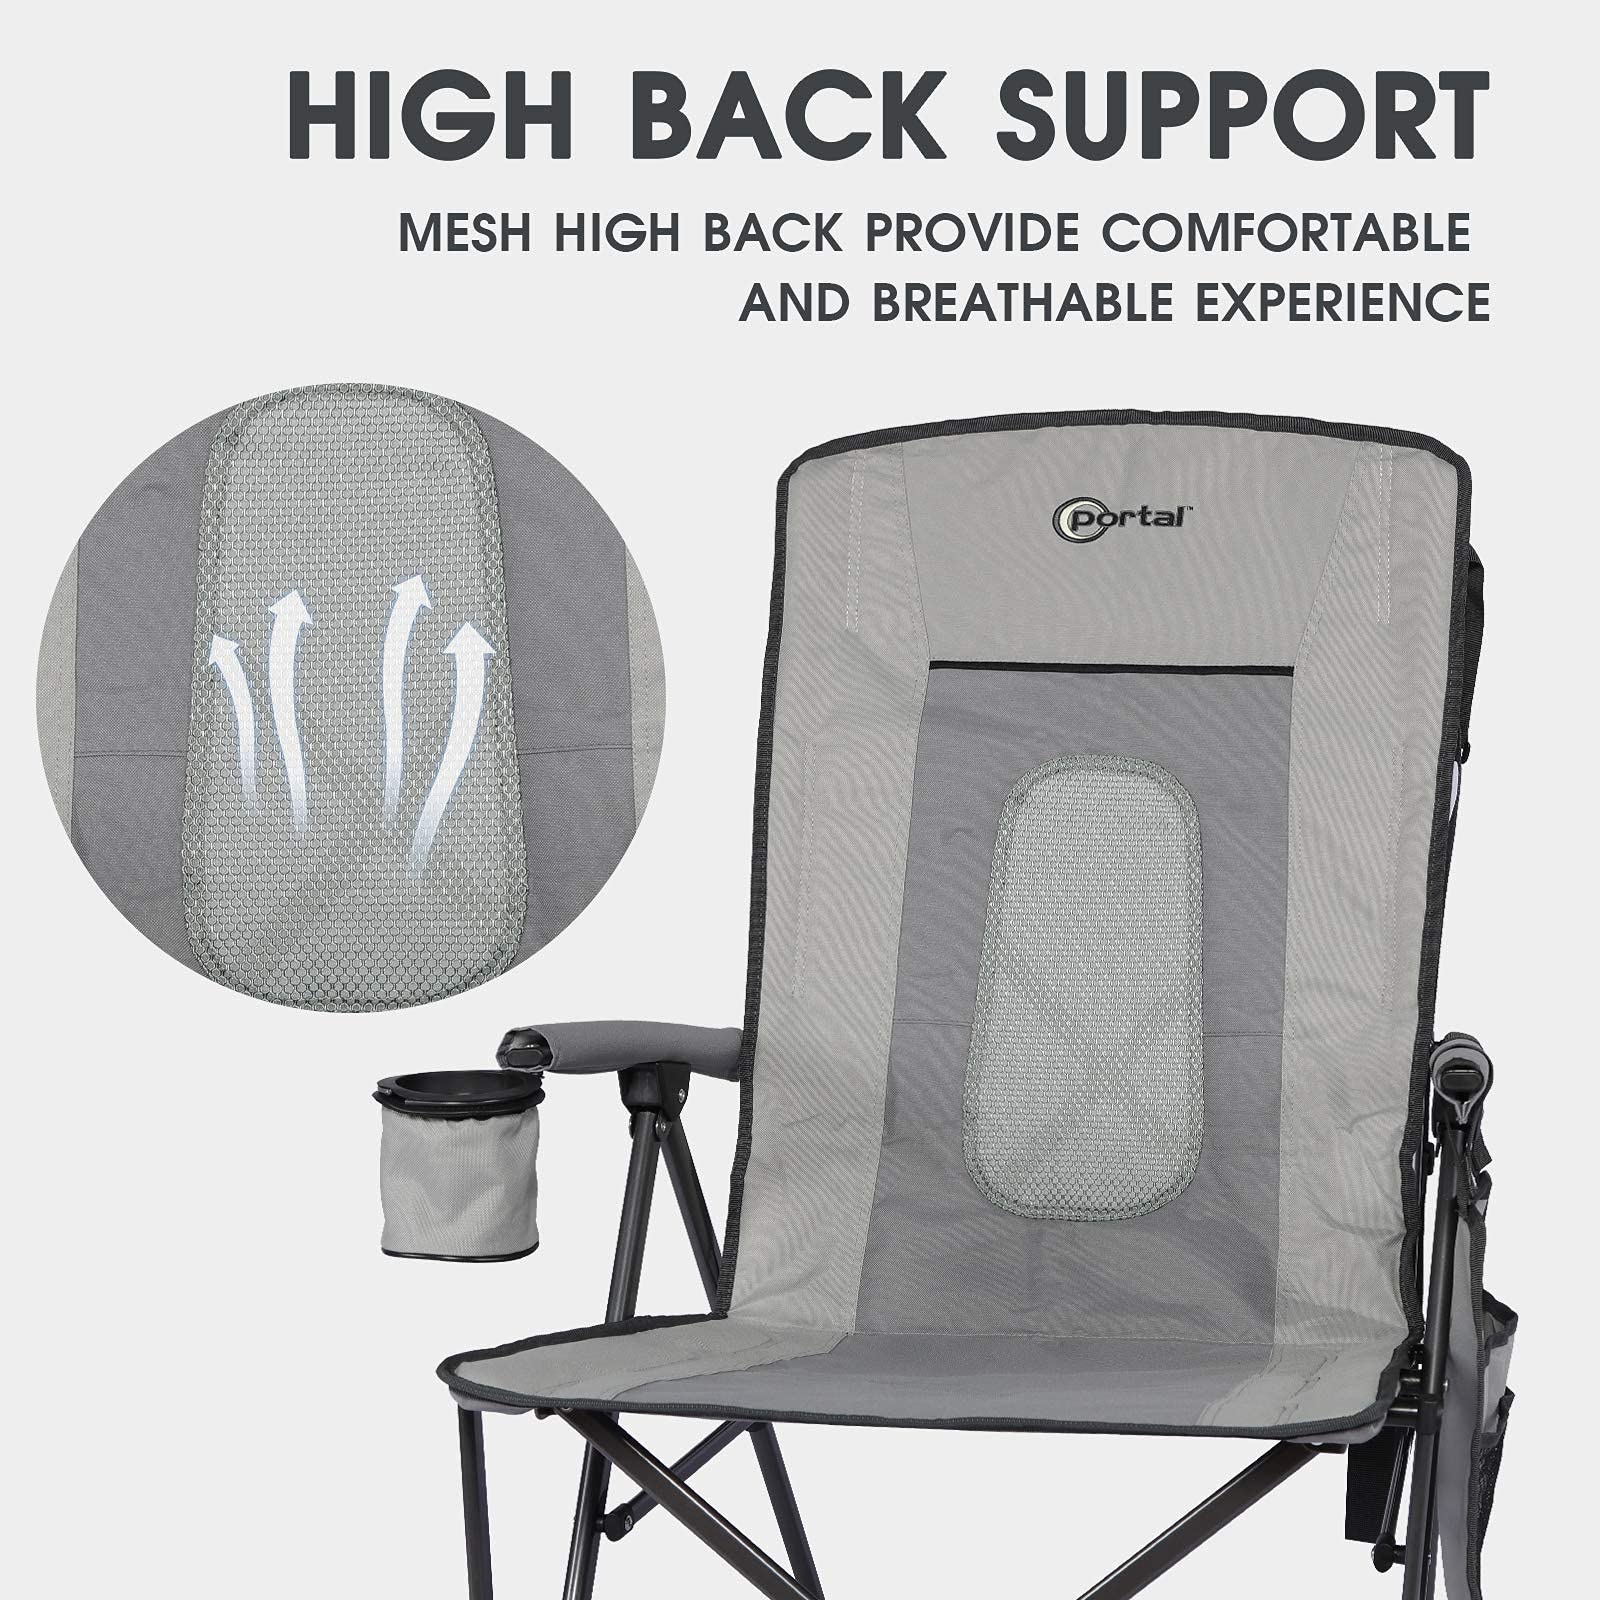 PORTAL Oversized Quad Folding Camping Chair High Back Cup Holder Hard Armrest Storage Pockets Carry Bag Included, Support 300 lbs (Dark Grey)